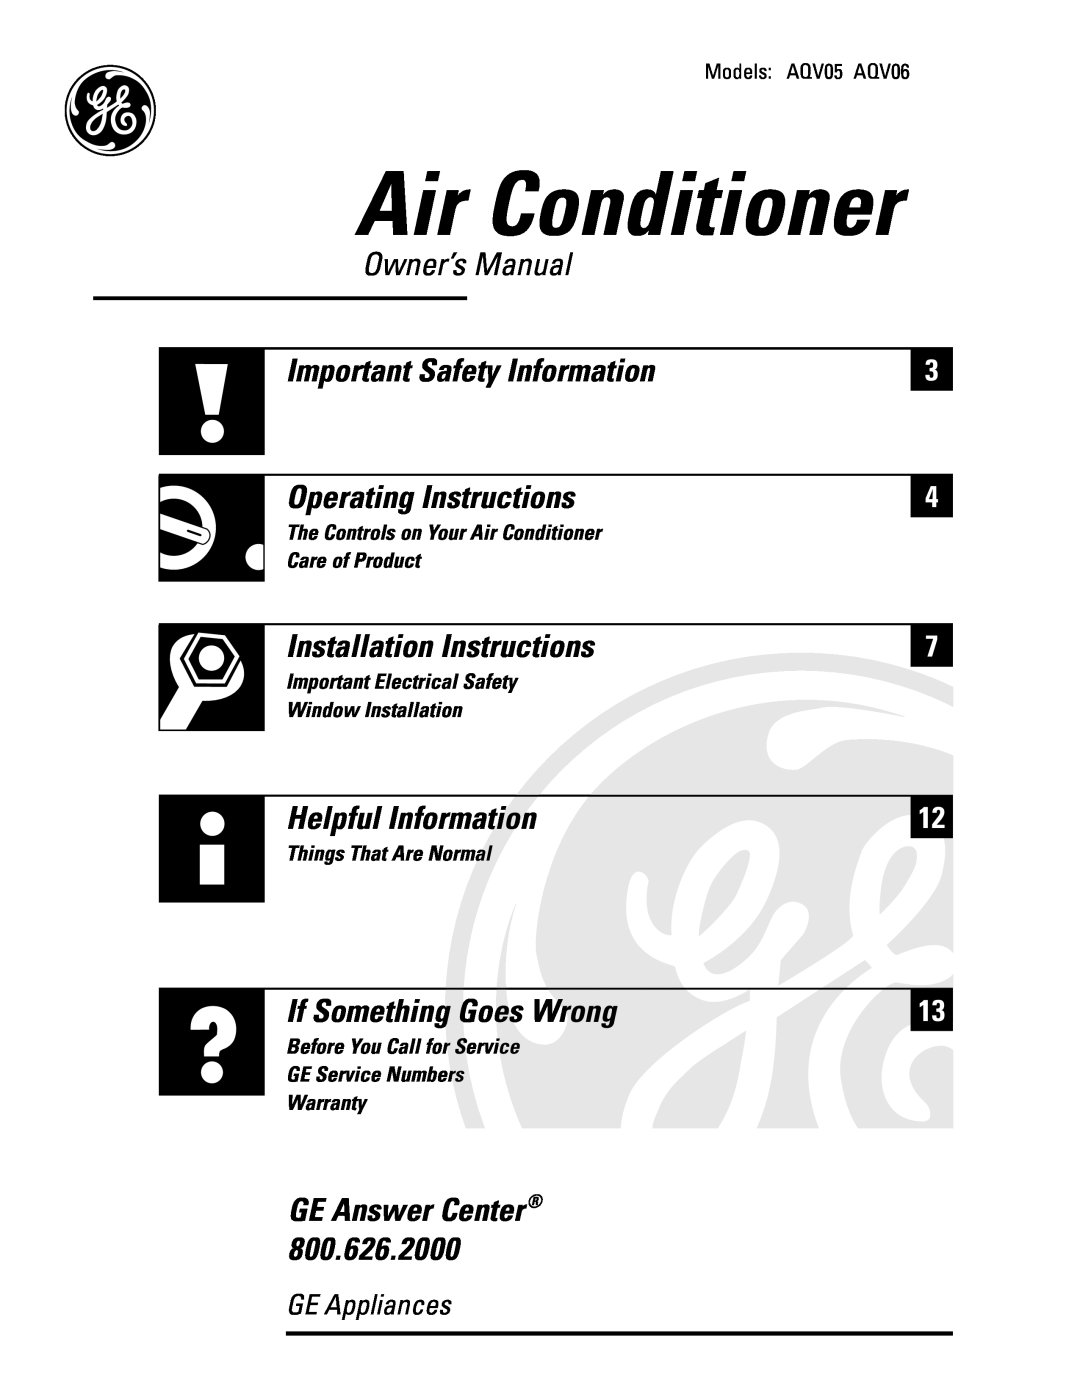 GE AQV06 installation instructions GE Answer Center, The Controls on Your Air Conditioner, Care of Product, Warranty 